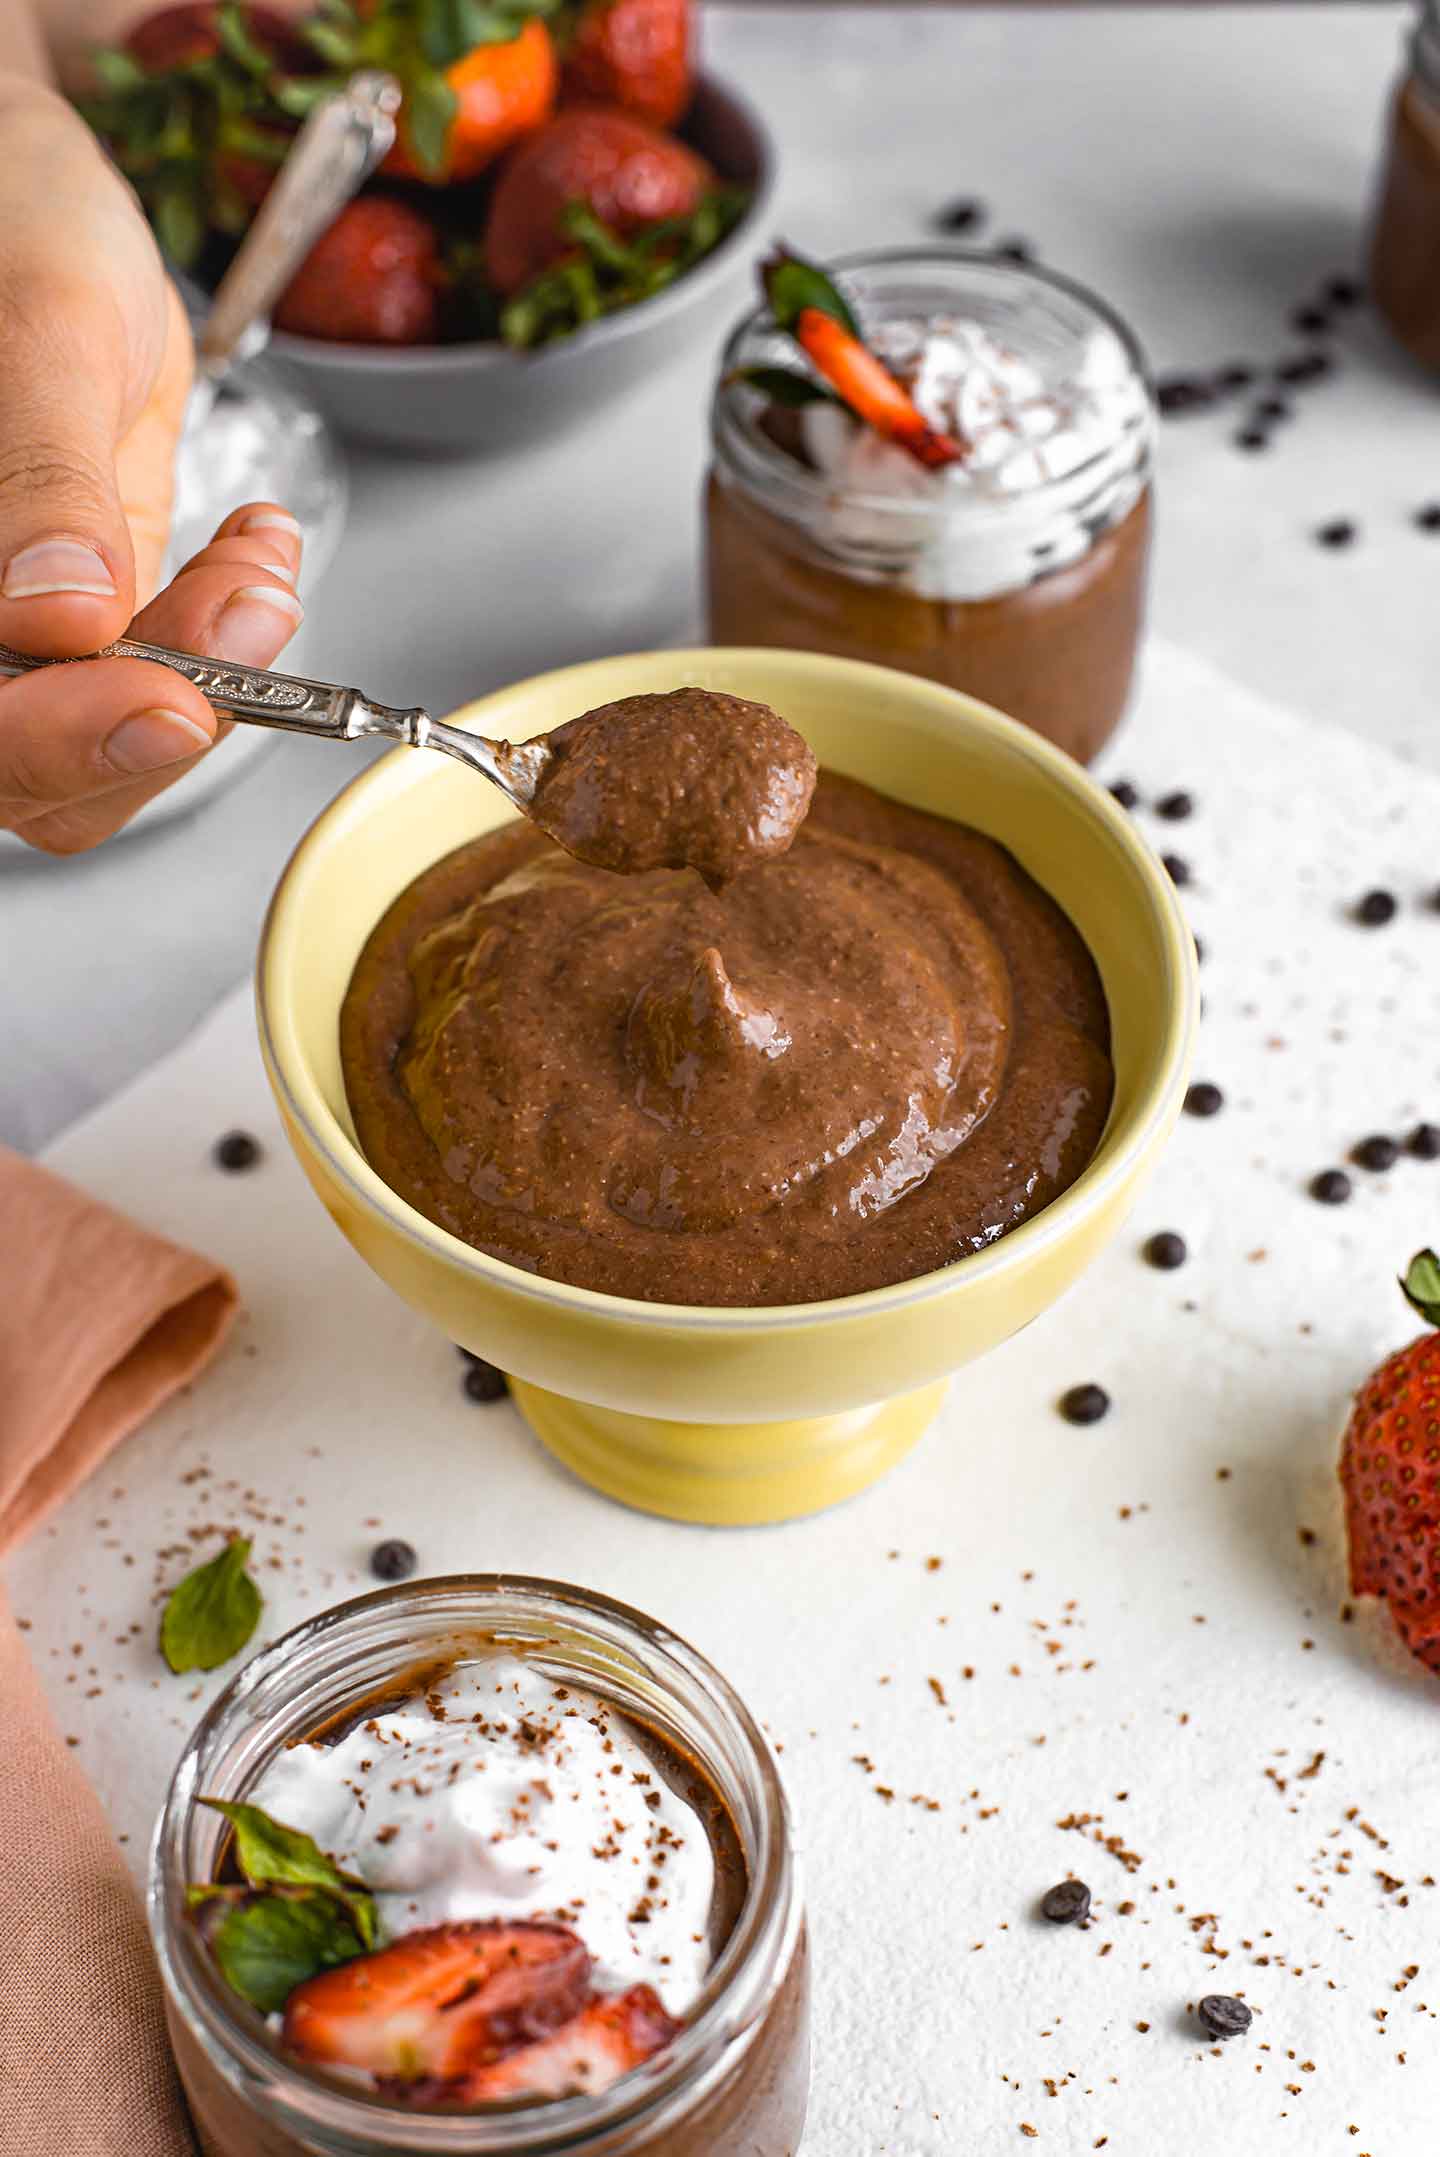 Side view of a spoon scooping thick chocolate pudding from a sorbet bowl. Chocolate chips and fresh strawberries are scattered around the bowl of pudding.